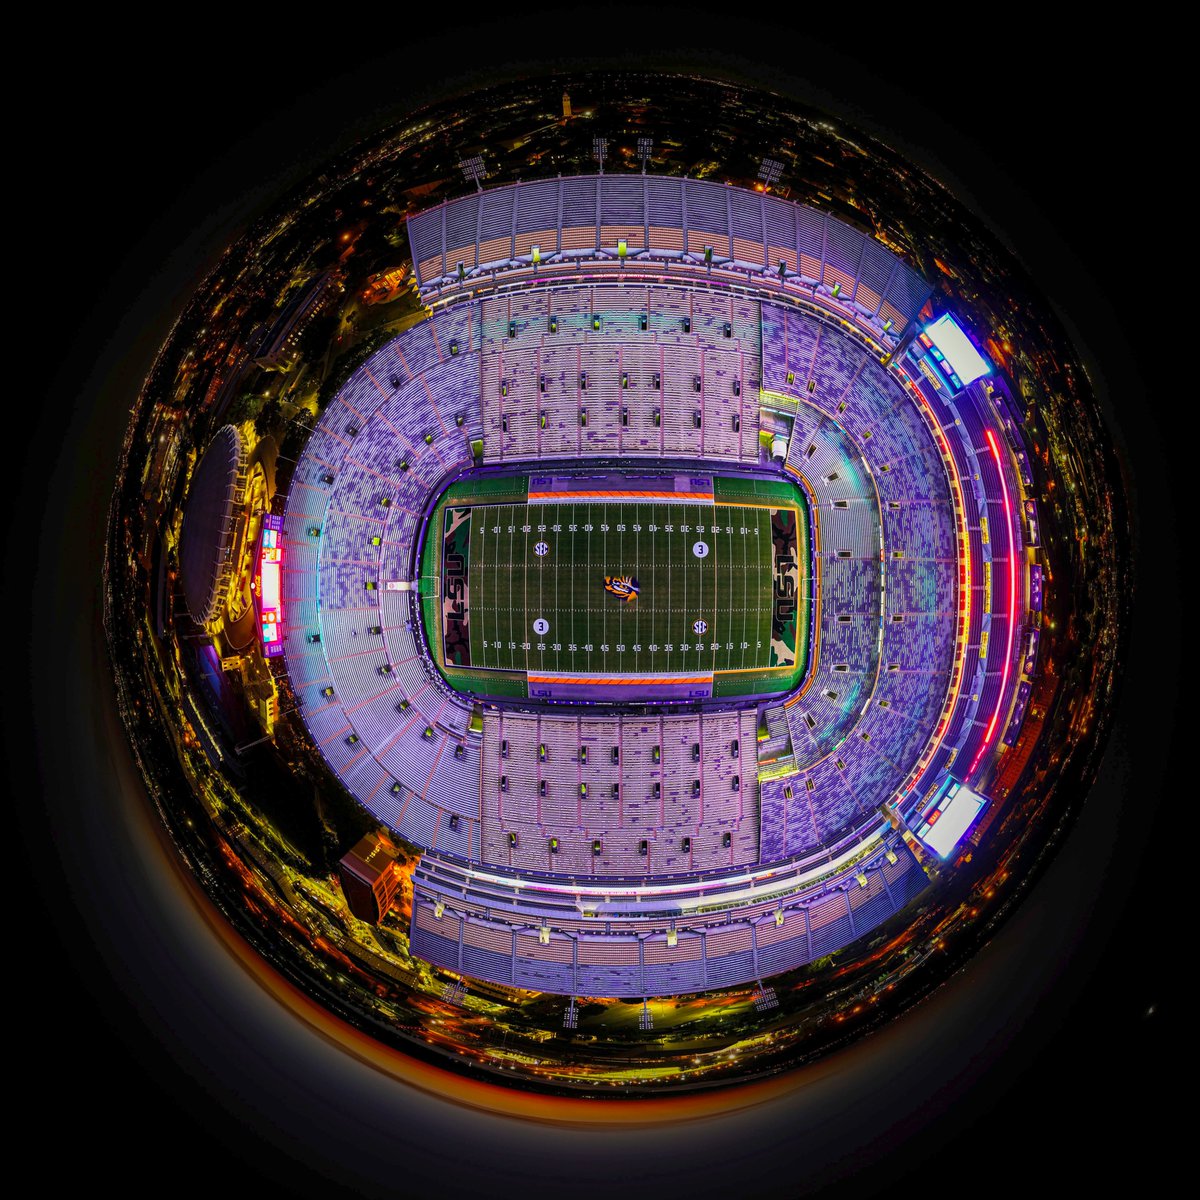 Shop at the Official Print Shop of LSU Athletics and use the code: PRINTSALE for 30% off lsul.su/PhotoStore